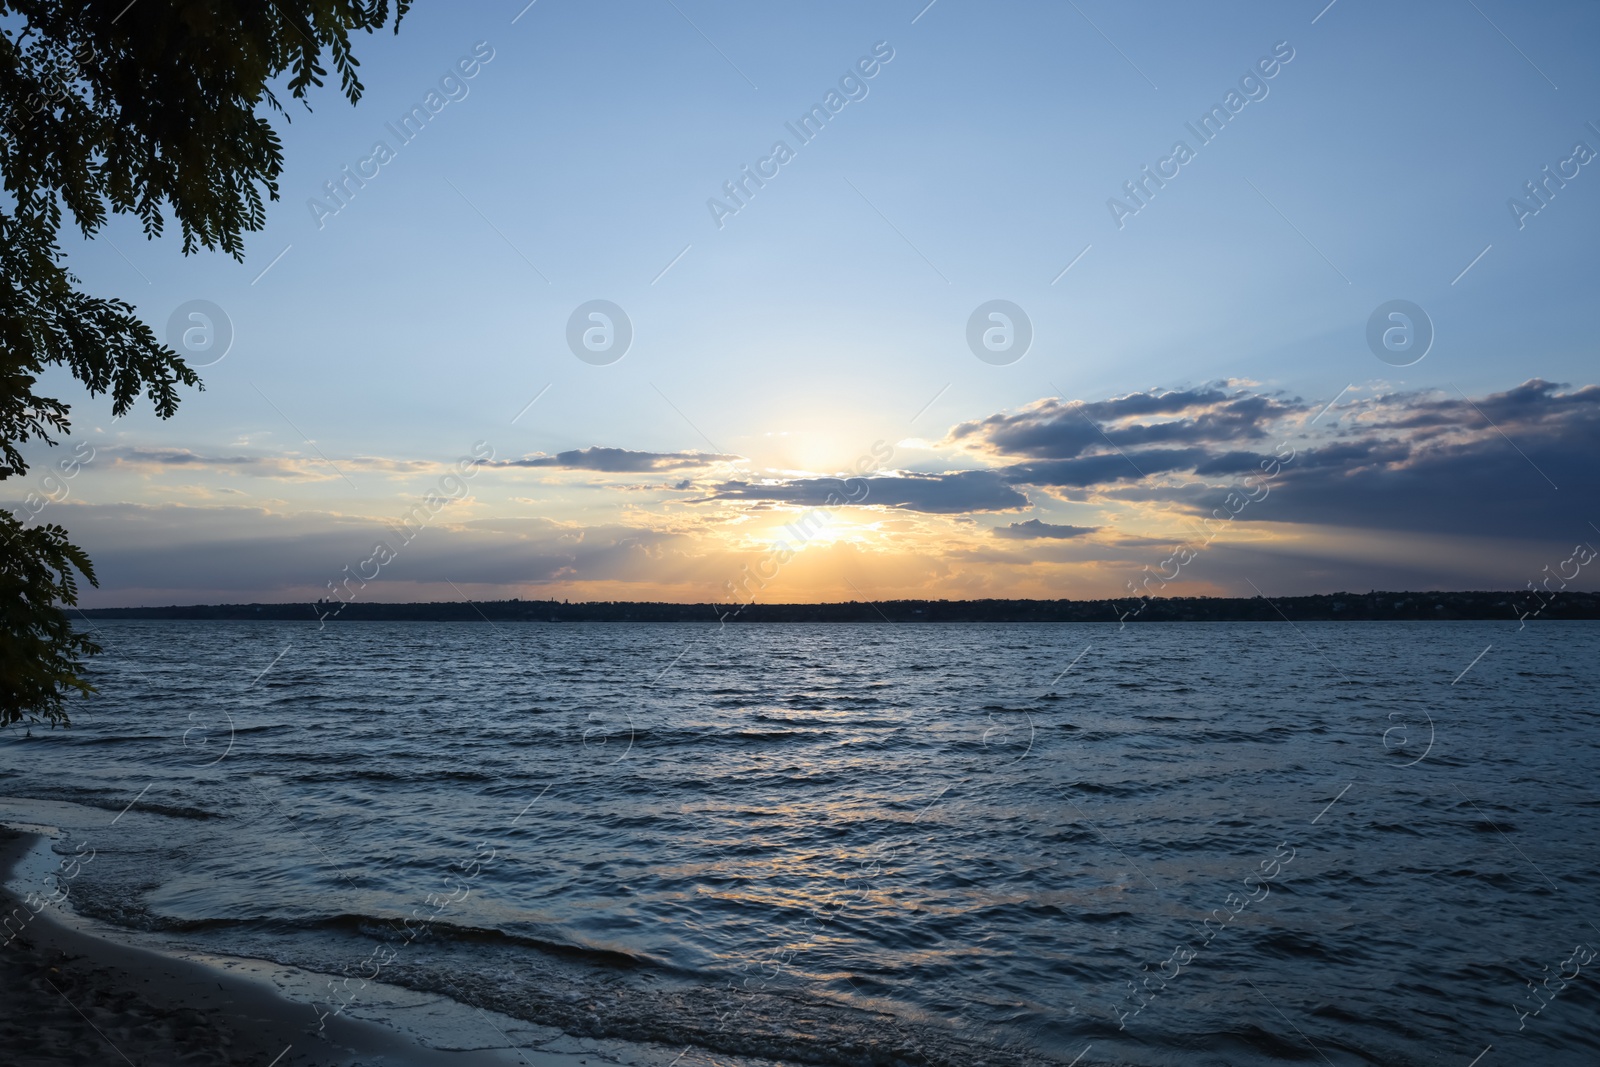 Photo of Picturesque view of tranquil river at sunset